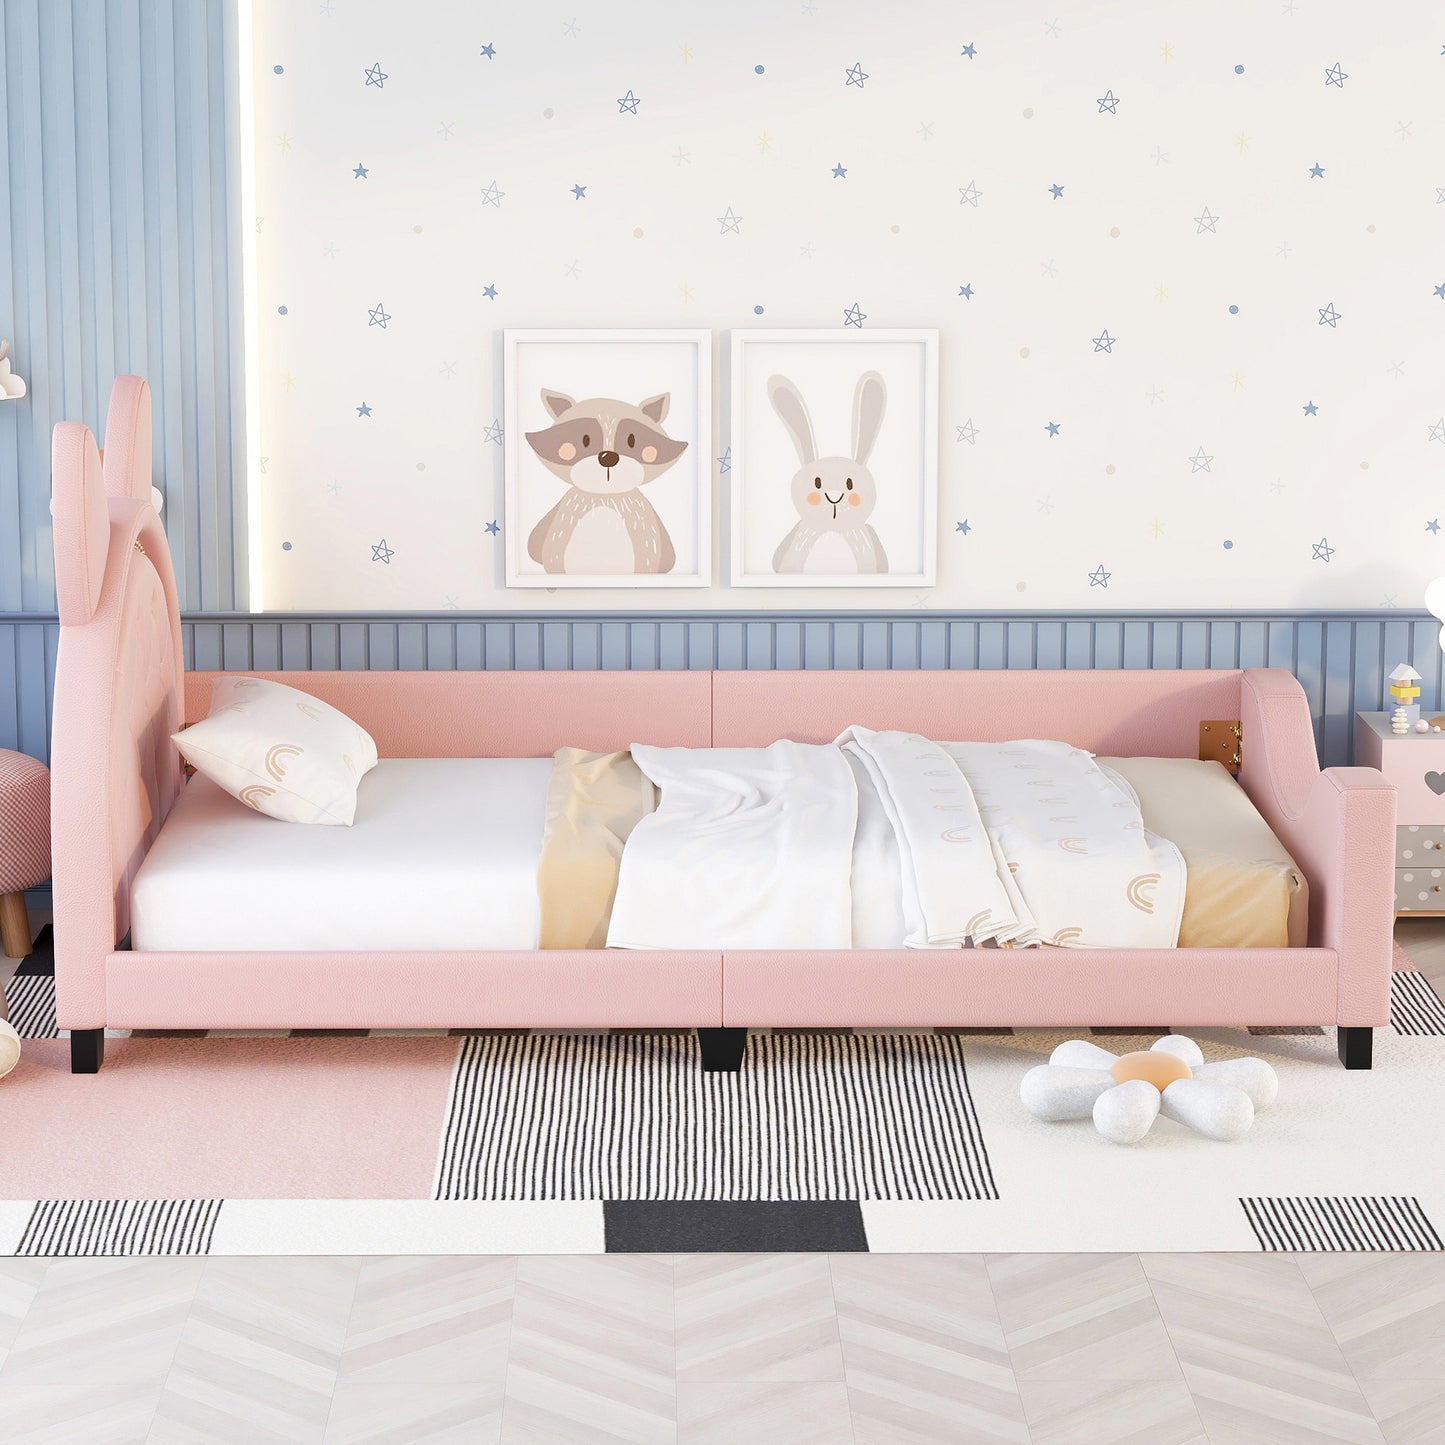 upholstered daybed with carton ears shaped headboard, pink